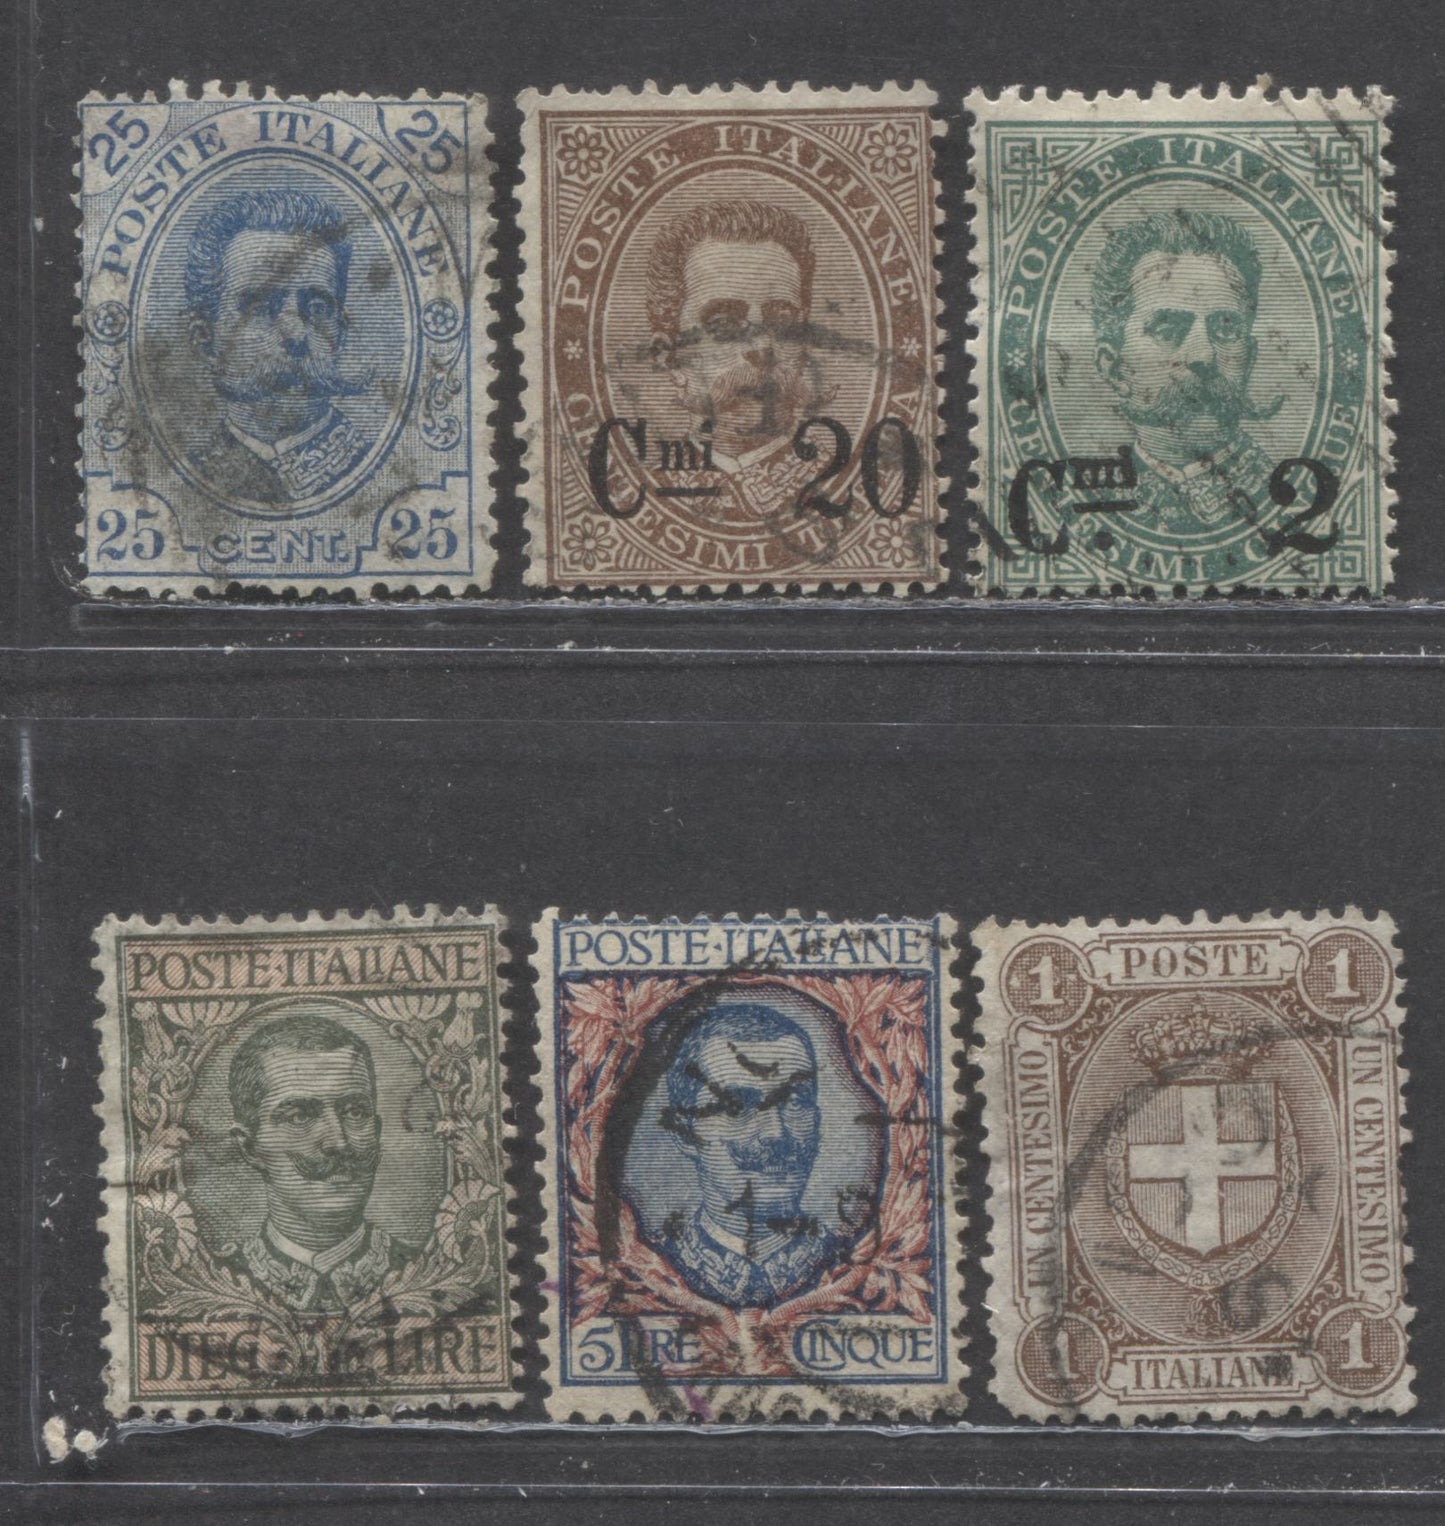 Lot 382 Italy SC#64/114 1890-1901 Humbert & Emmanuel III Issues, 6 Very Good Used Singles, Click on Listing to See ALL Pictures, 2022 Scott Classic Cat. $25 USD